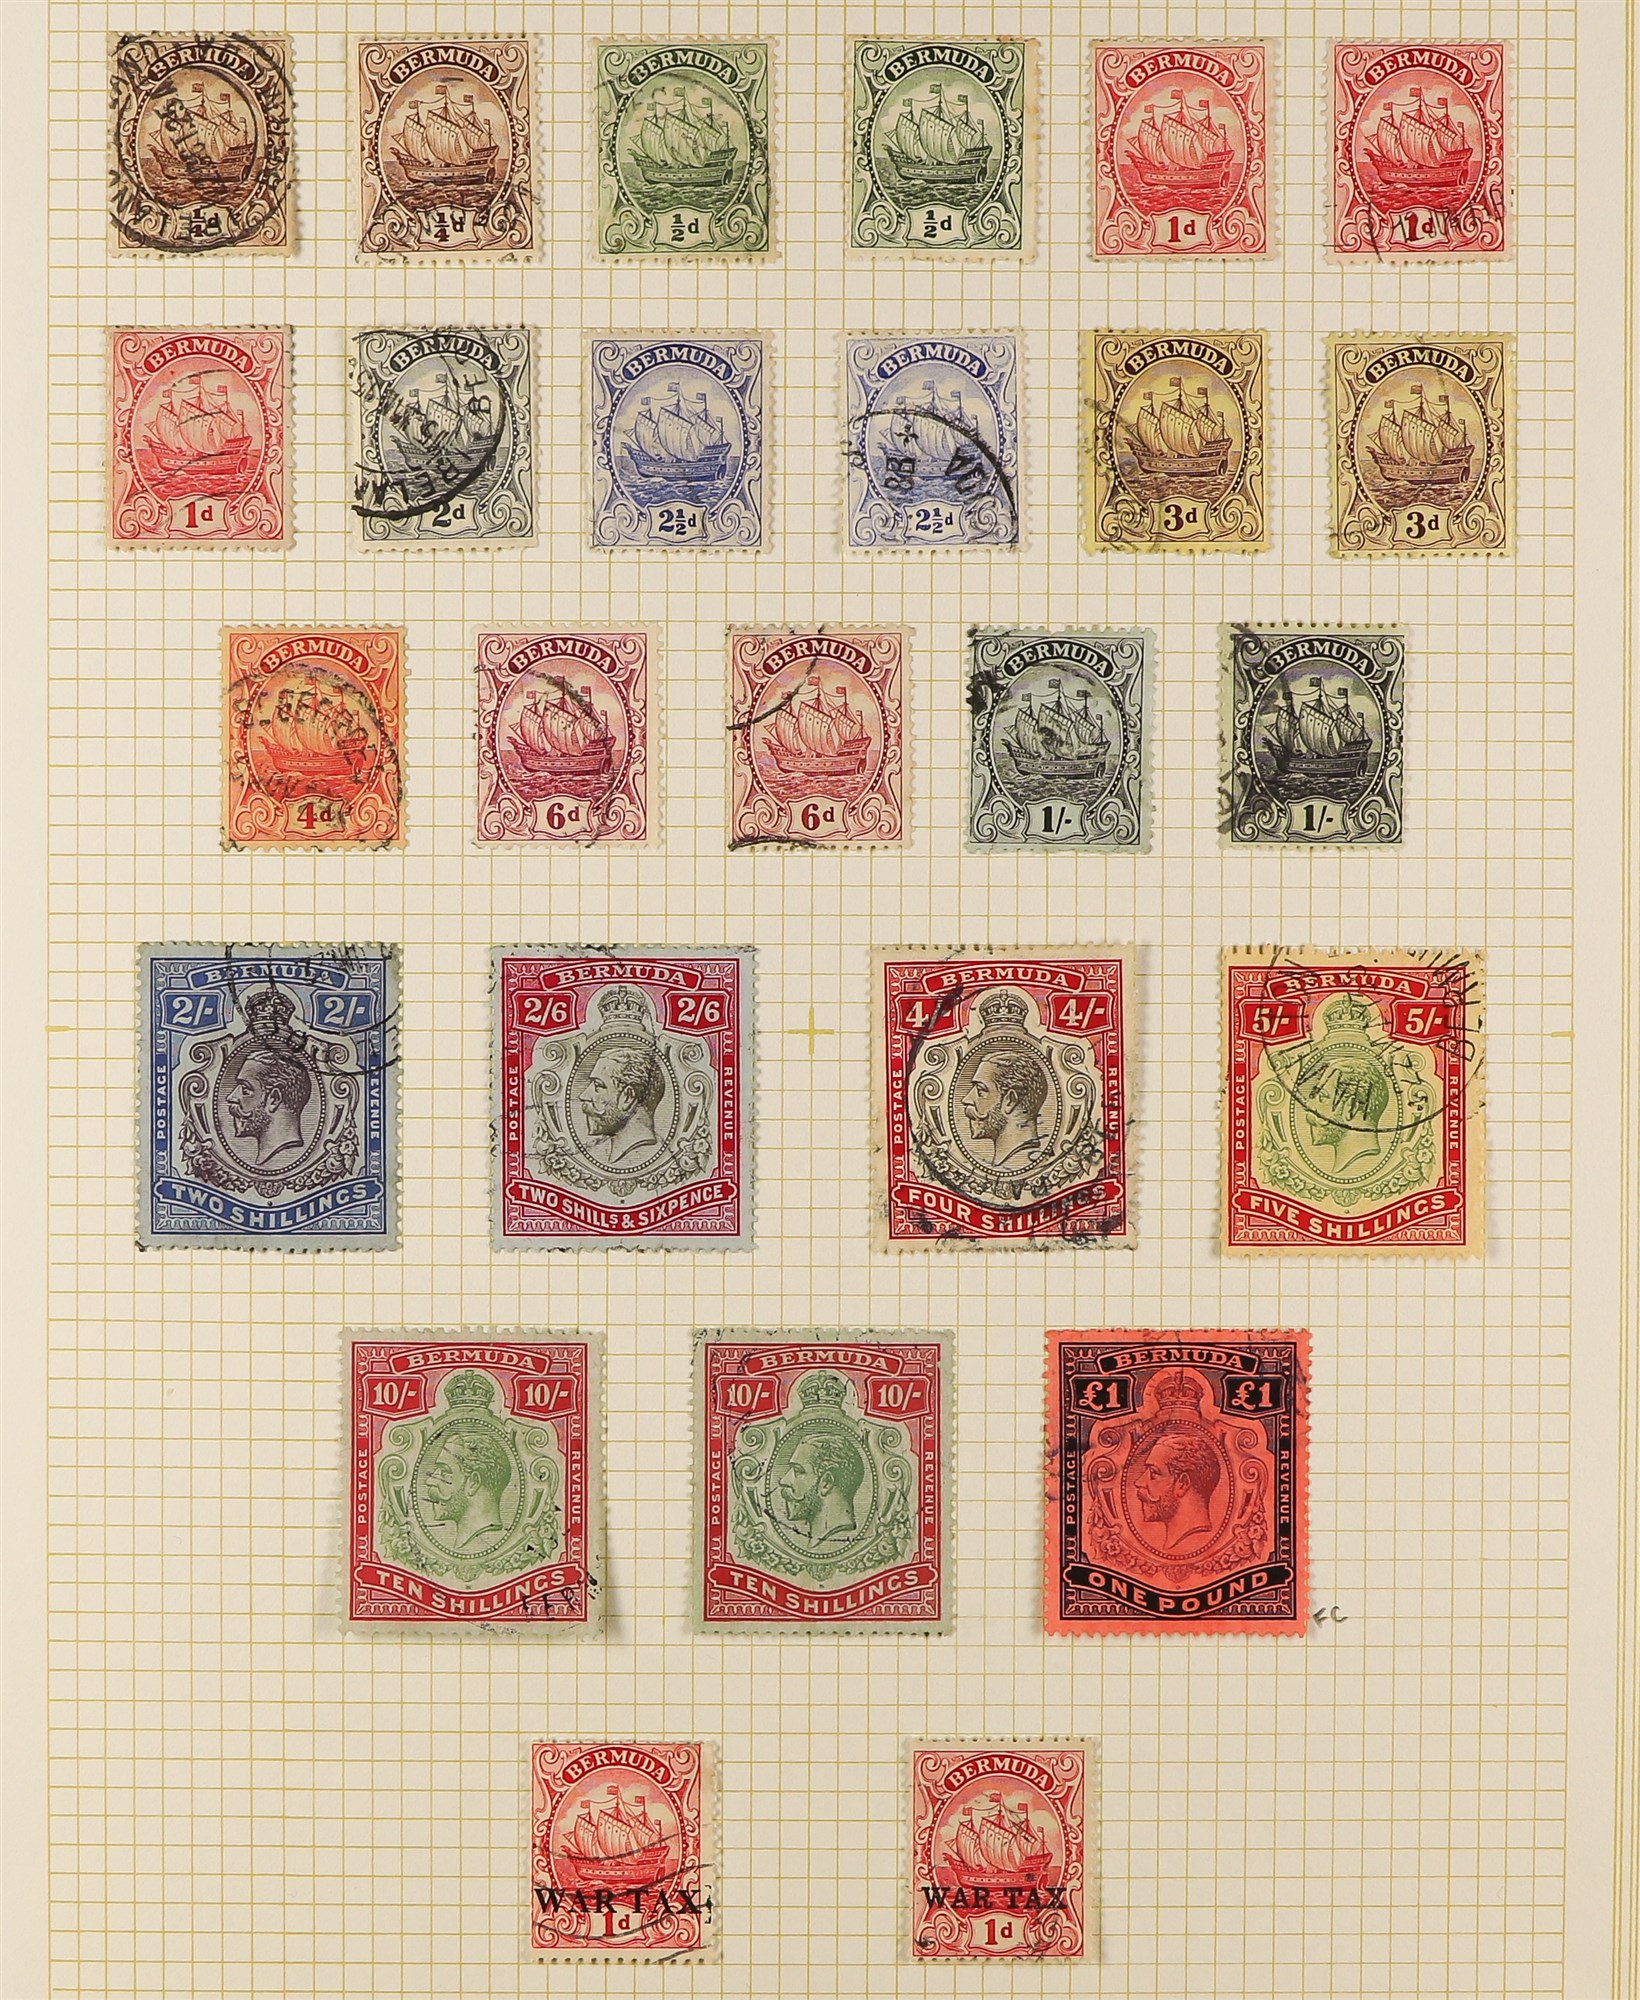 BERMUDA 1910 - 1936 USED COLLECTION of 80 stamps on album pages, note 1910-25 set with additional - Image 4 of 4